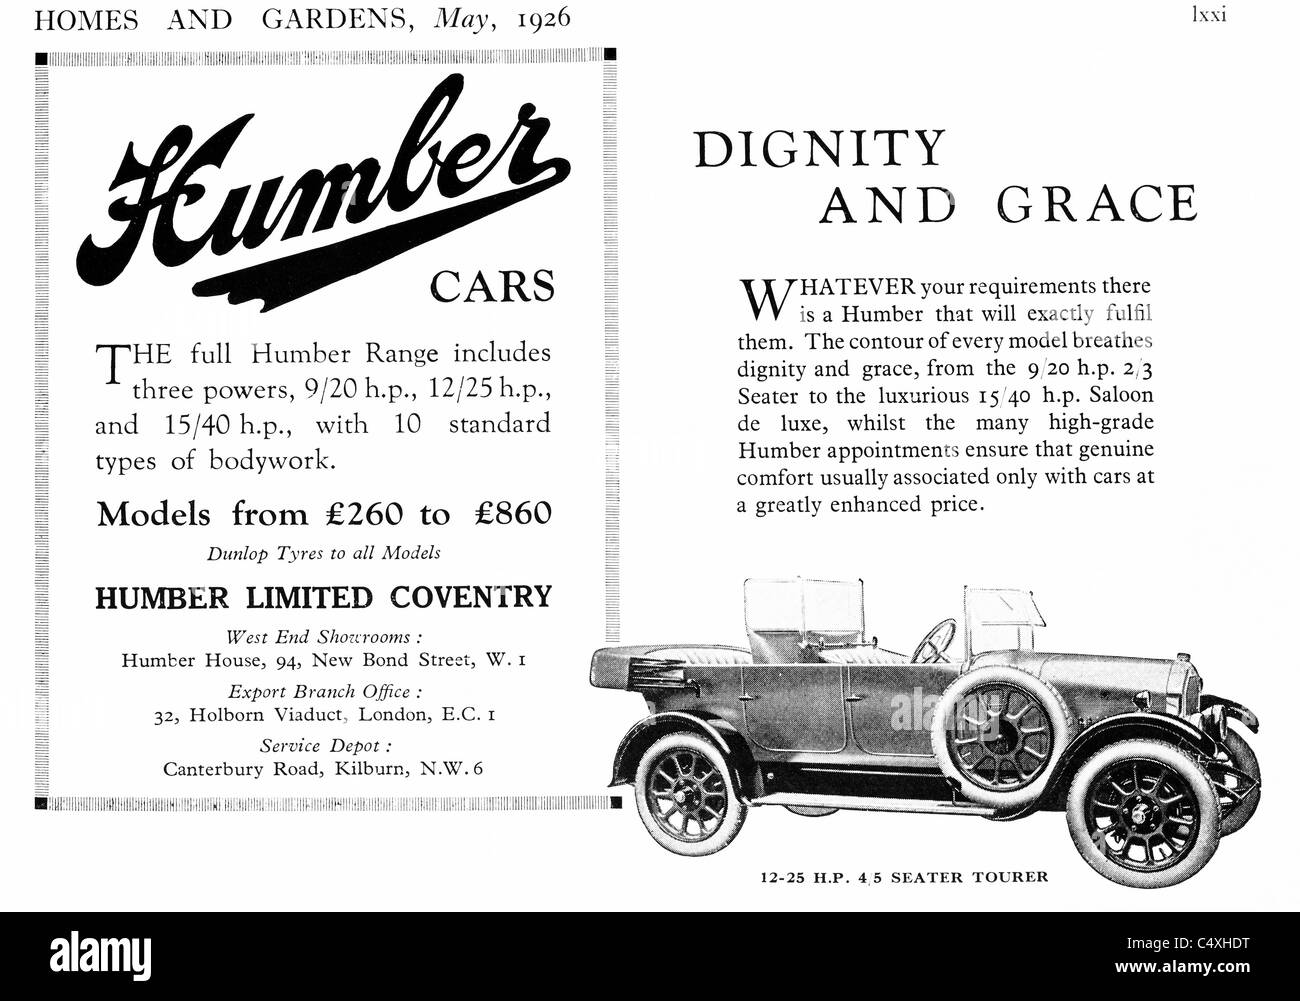 1926 'Humber Cars' Advertisement from 'Homes and Gardens' magazine. Stock Photo